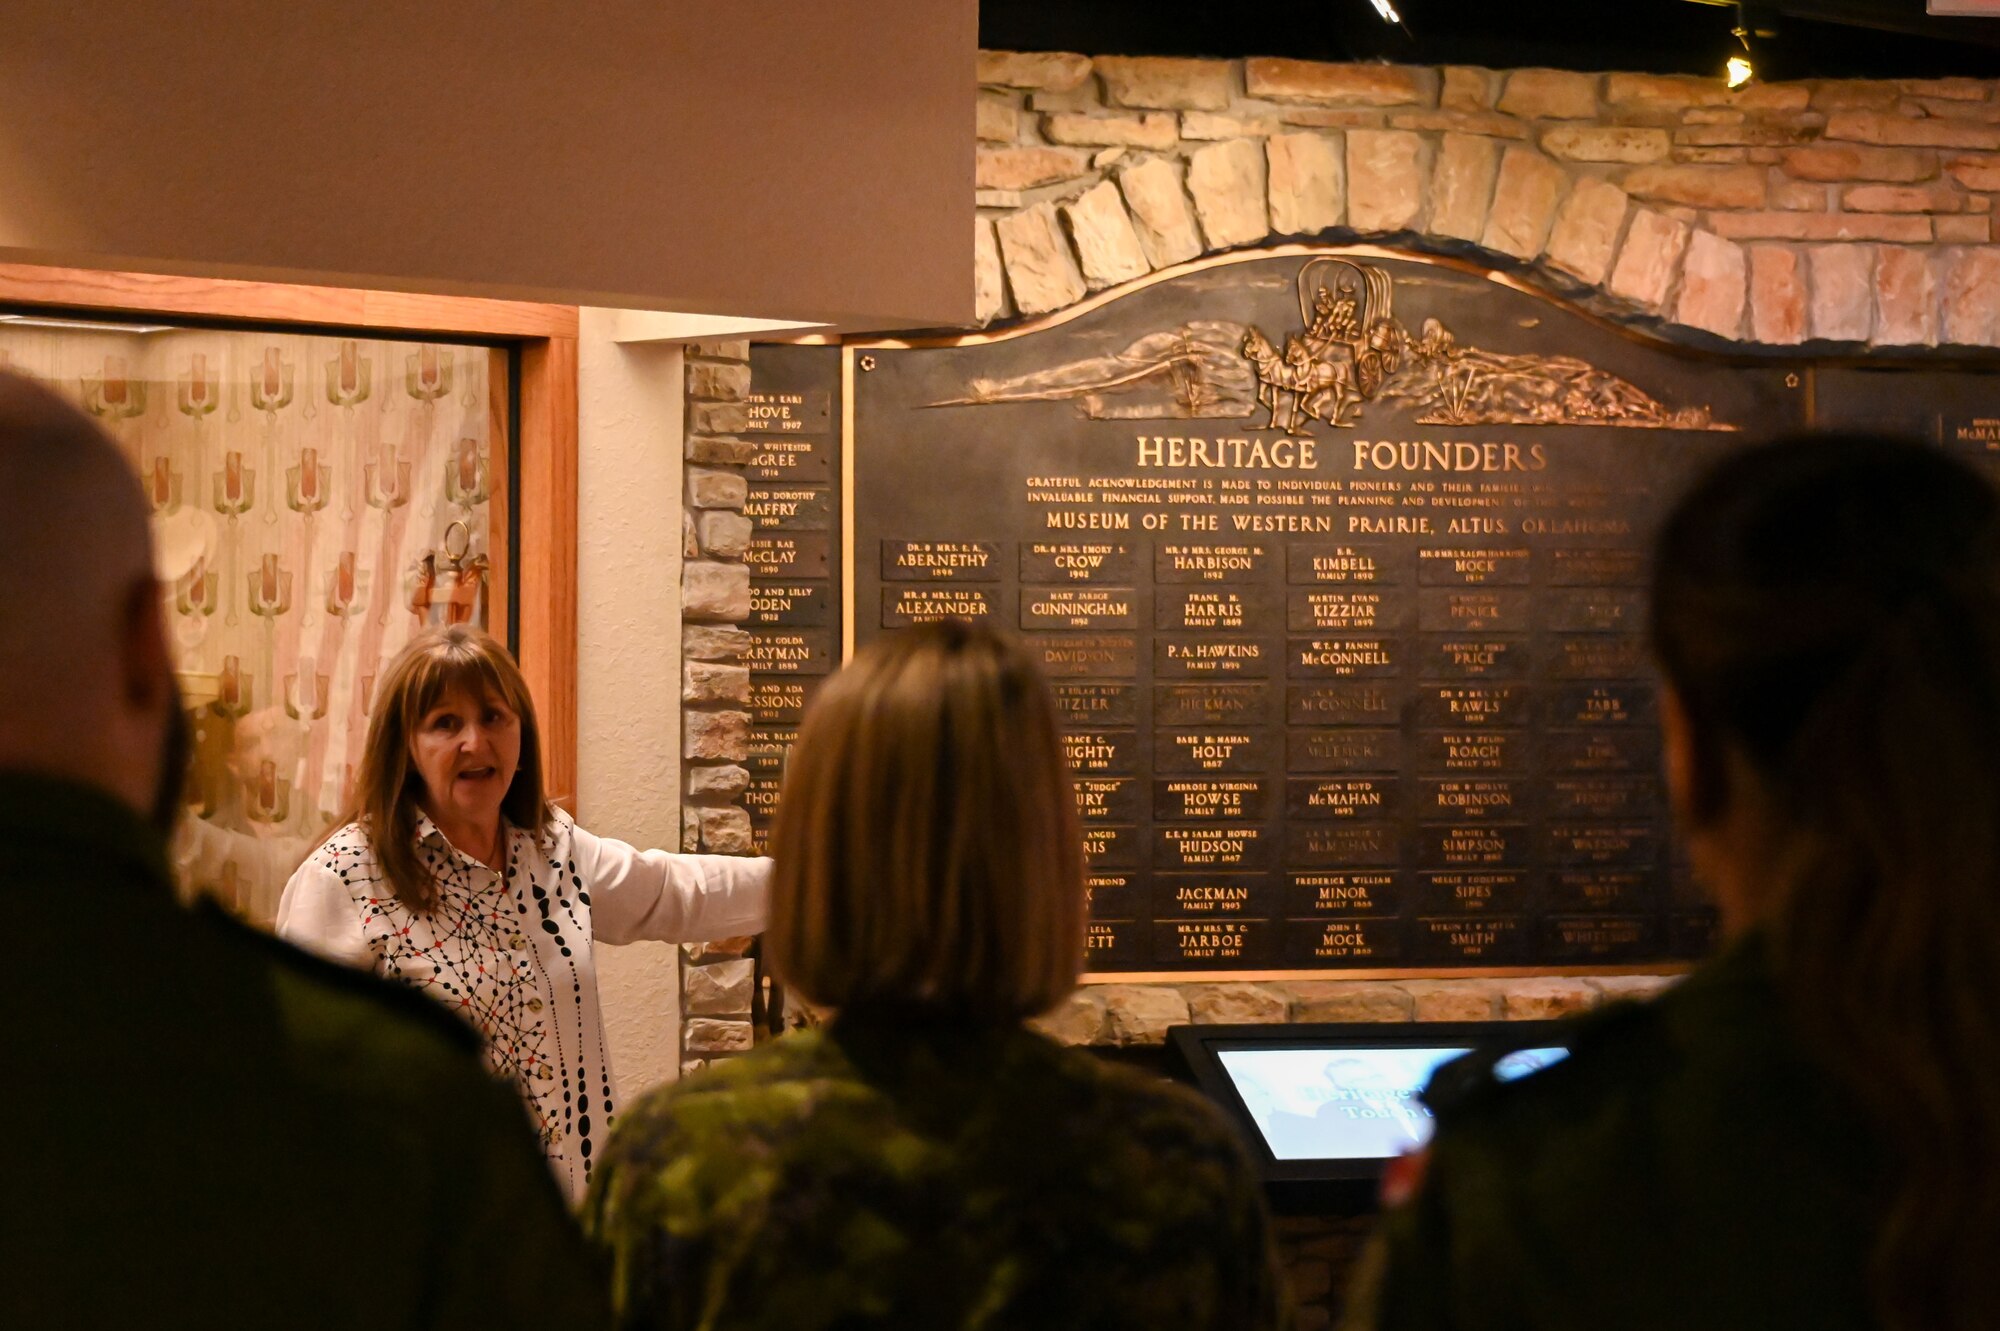 Jennie Buchanan, Museum of the Western Prairie director, shares Oklahoma history information during a tour for 97th Training Squadron international students at the museum in Altus, Oklahoma, May 19, 2023. The plaque highlighted over 20 names of Altus’ heritage founders and their contributions to the community. (U.S. Air Force photo by Senior Airman Kayla Christenson)